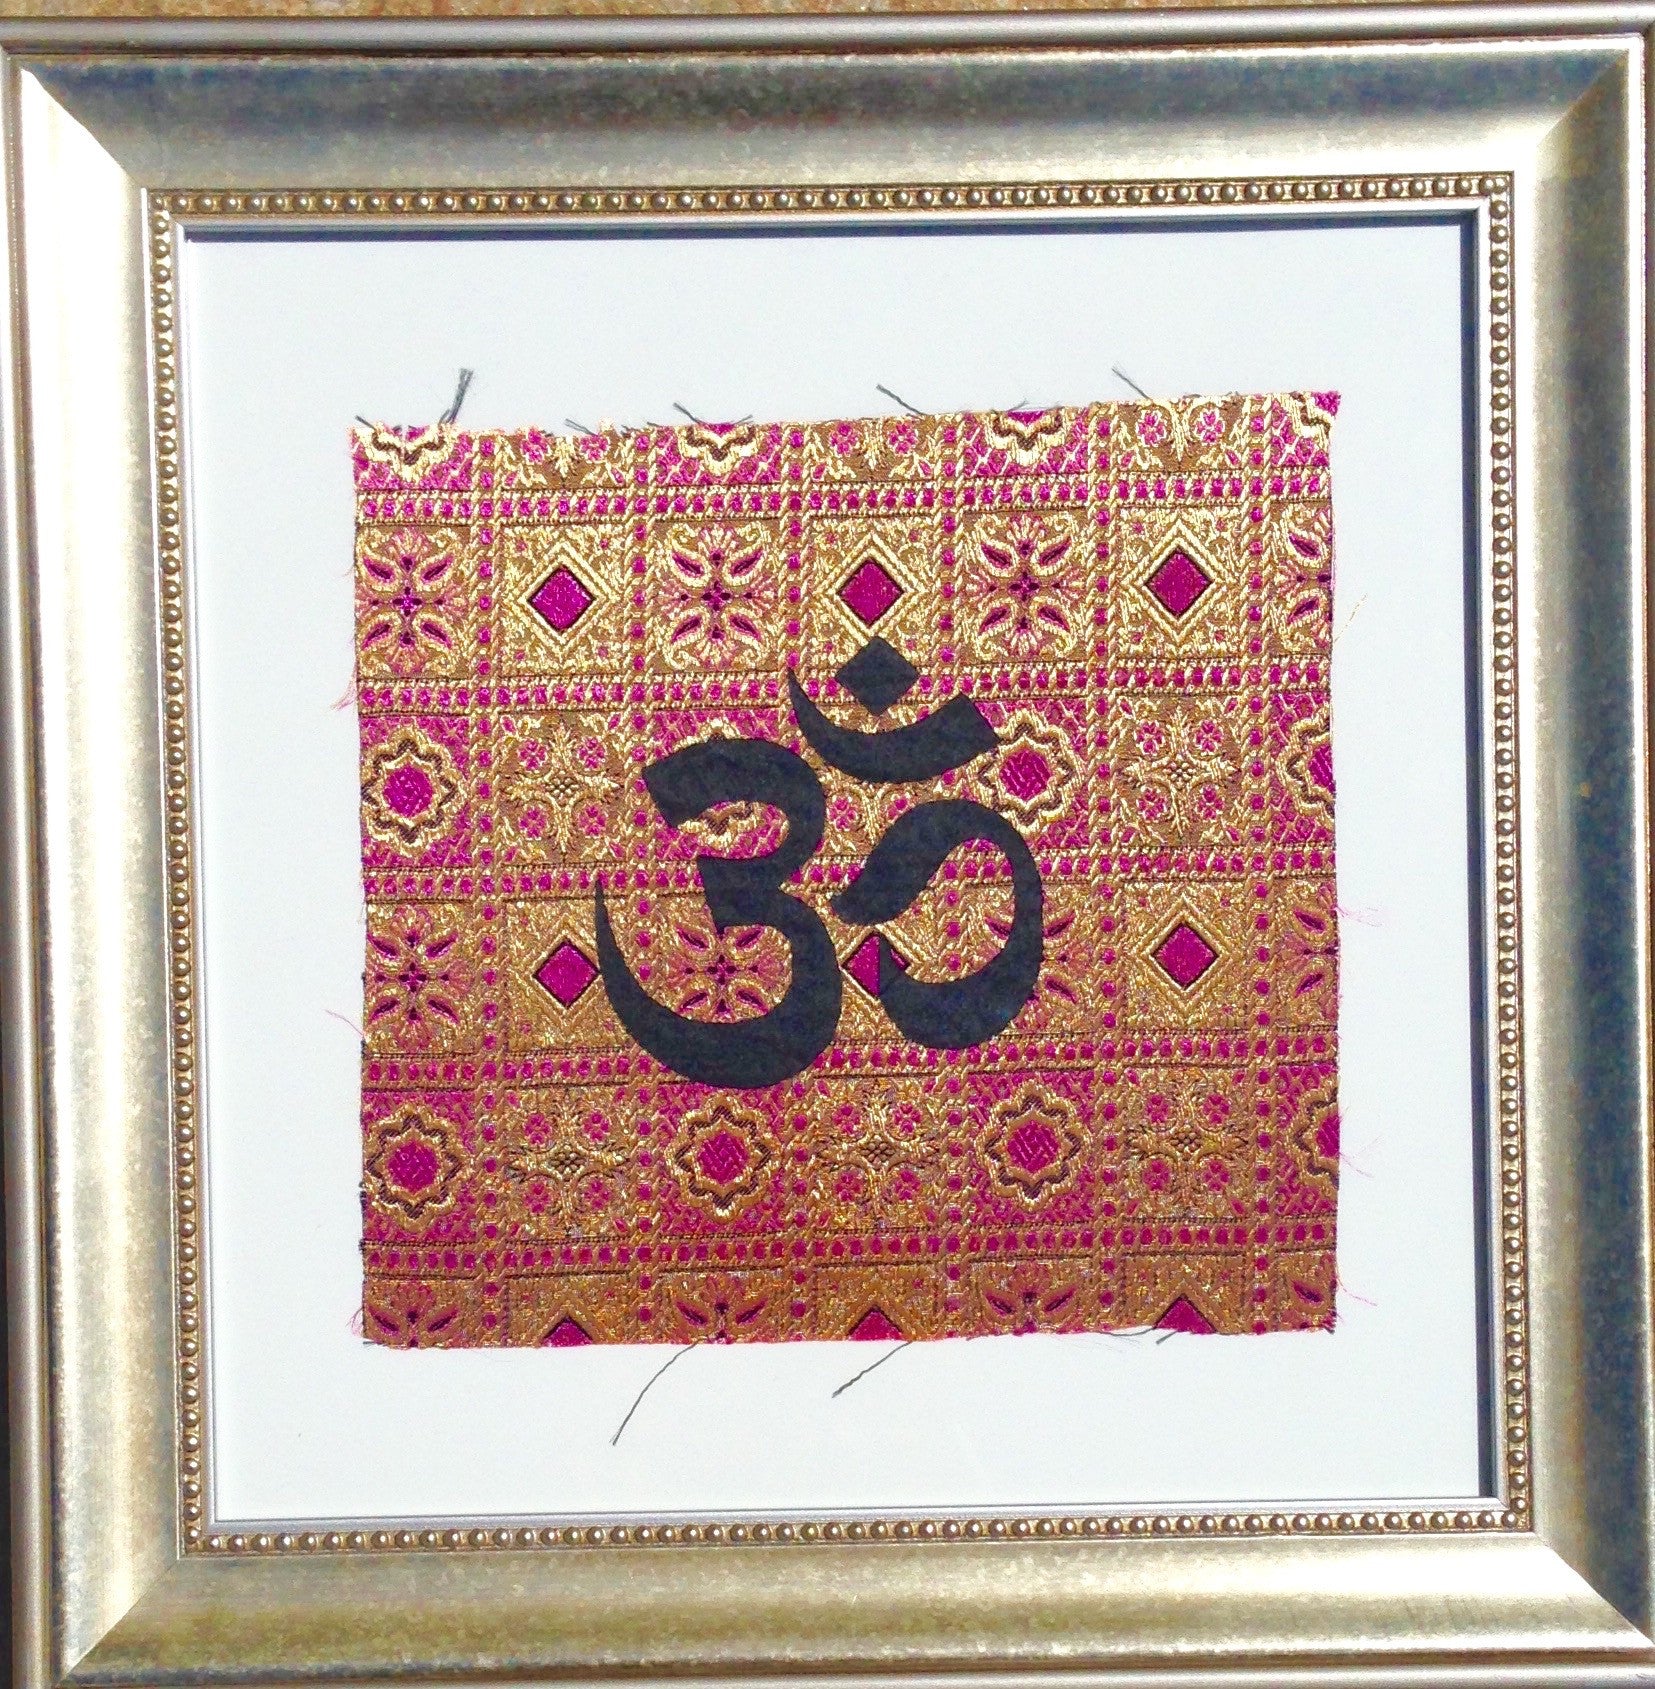 Indonesia- Bali Collection- Framed Wall Print- Om (Purple Reverse)